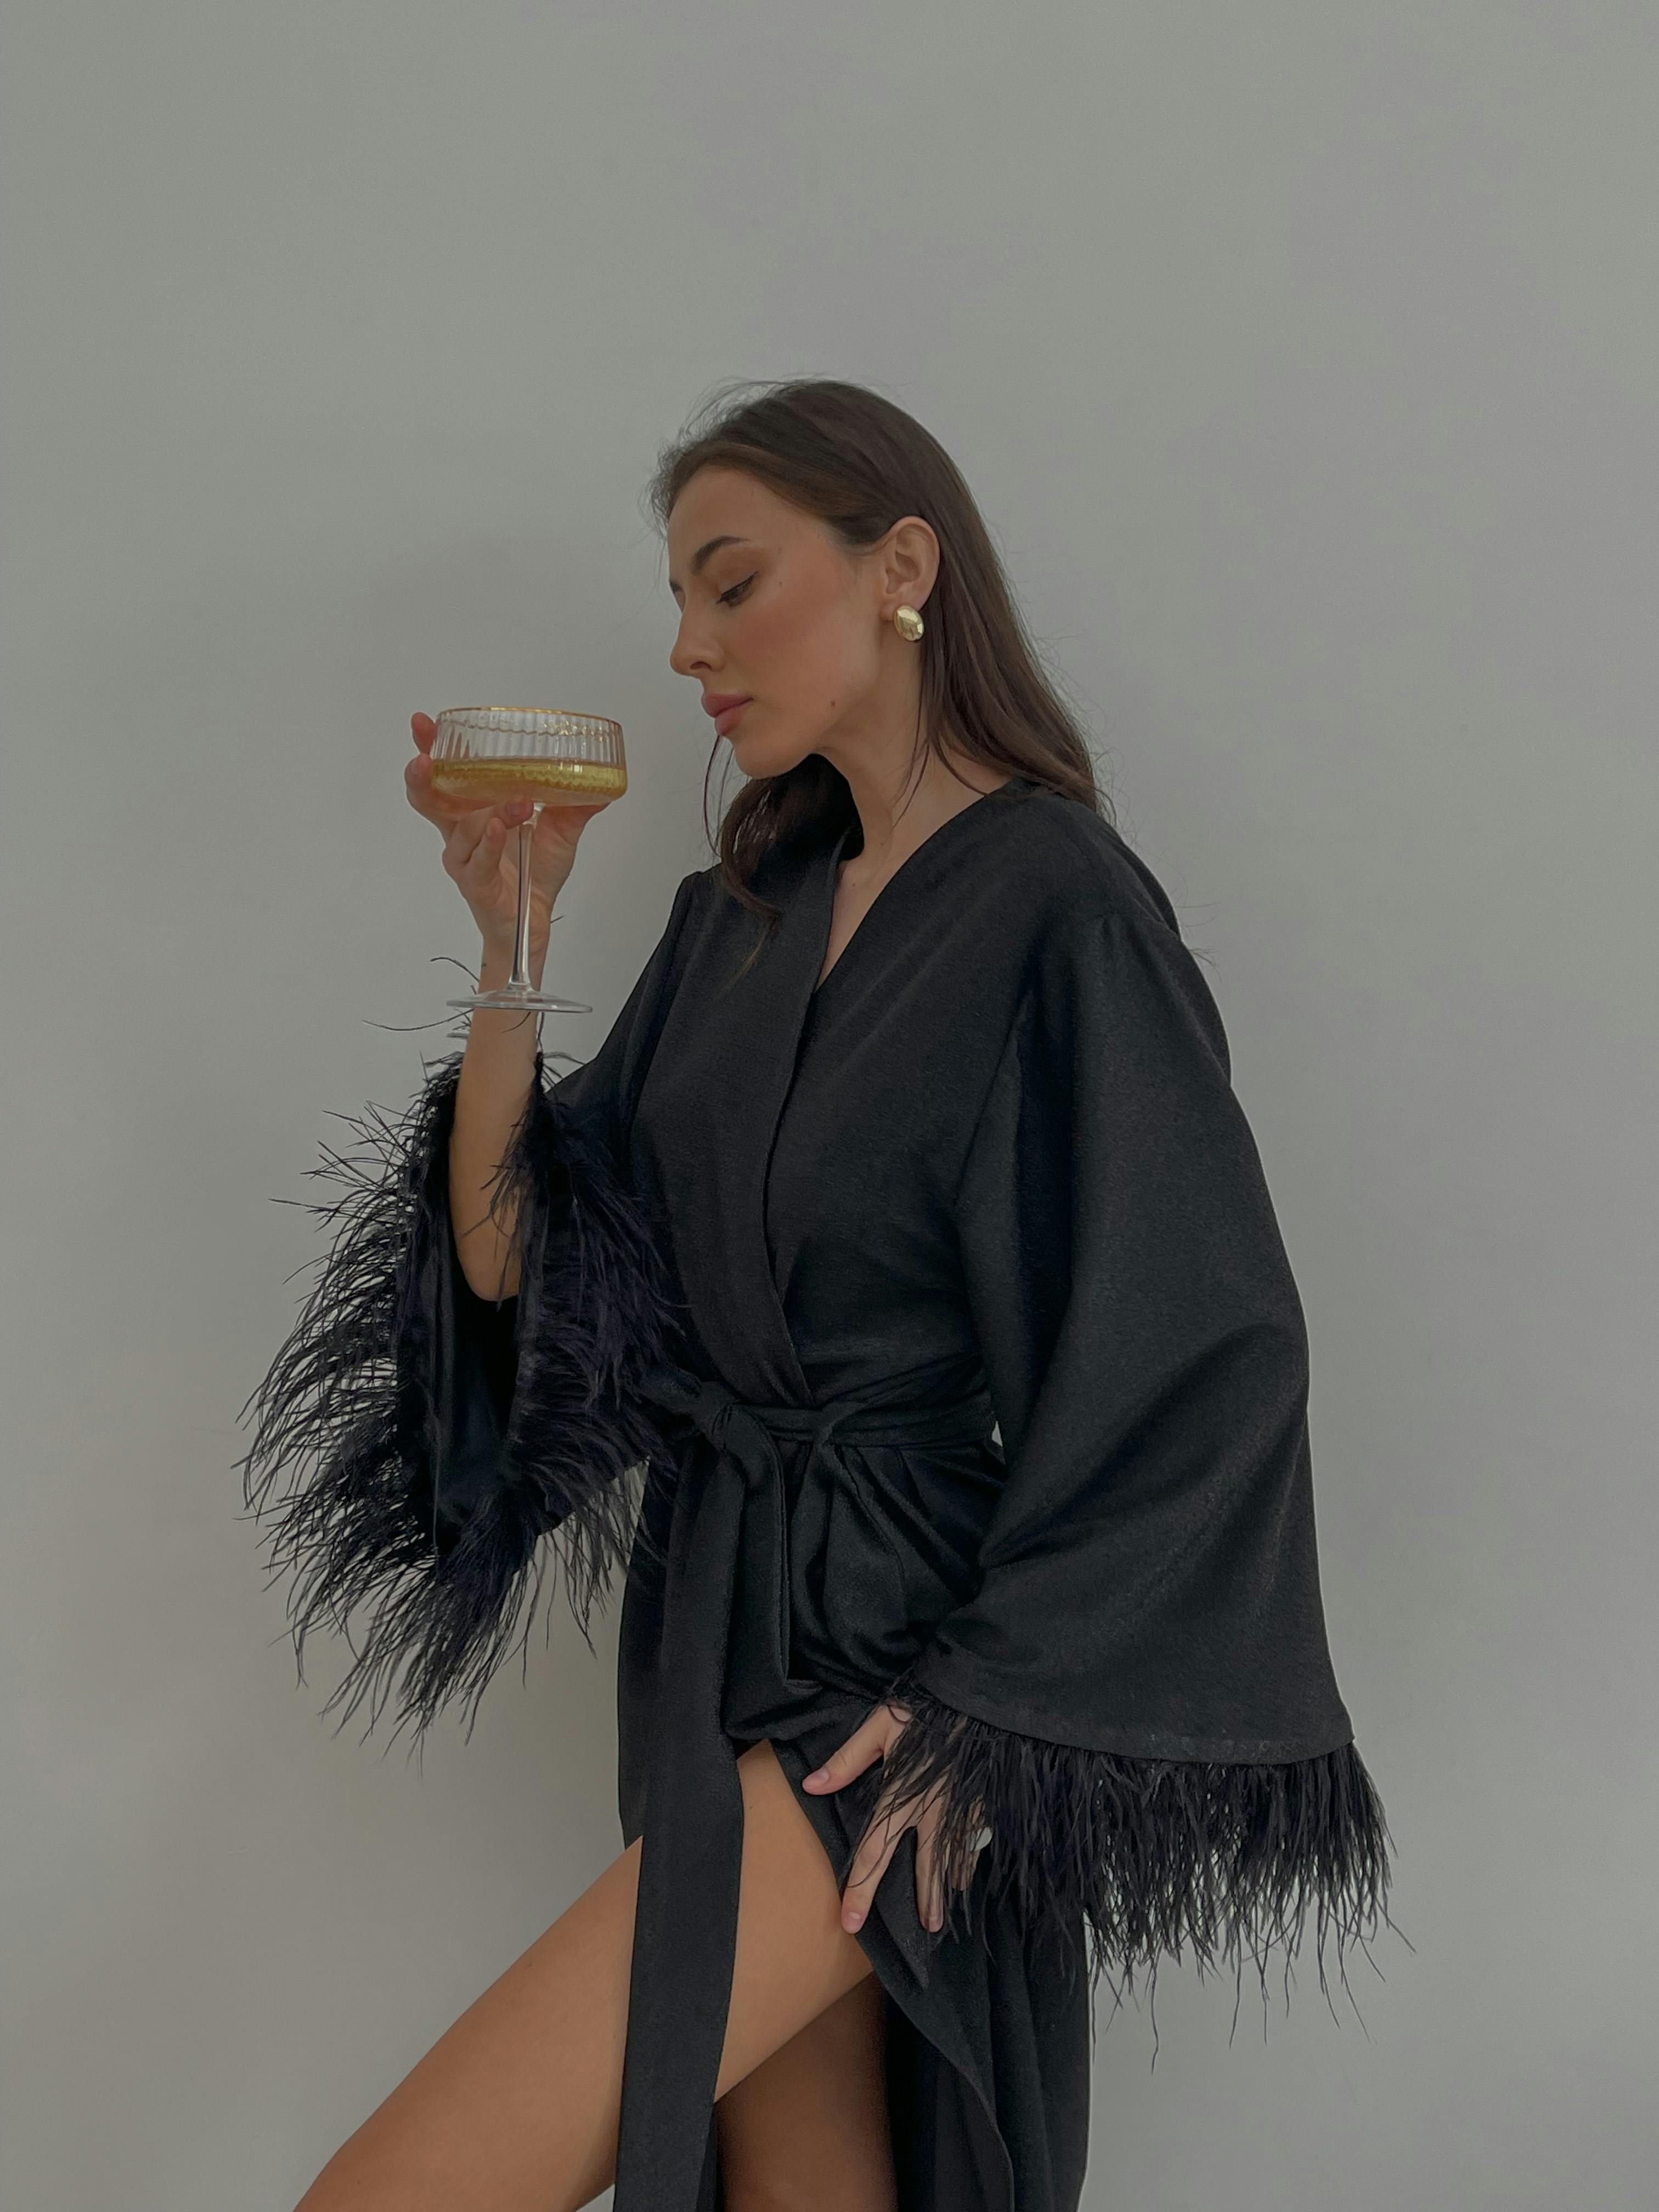 Additional image of Shiny Long Black Robe With Feathers Sleeves, a product by Okiya Studio